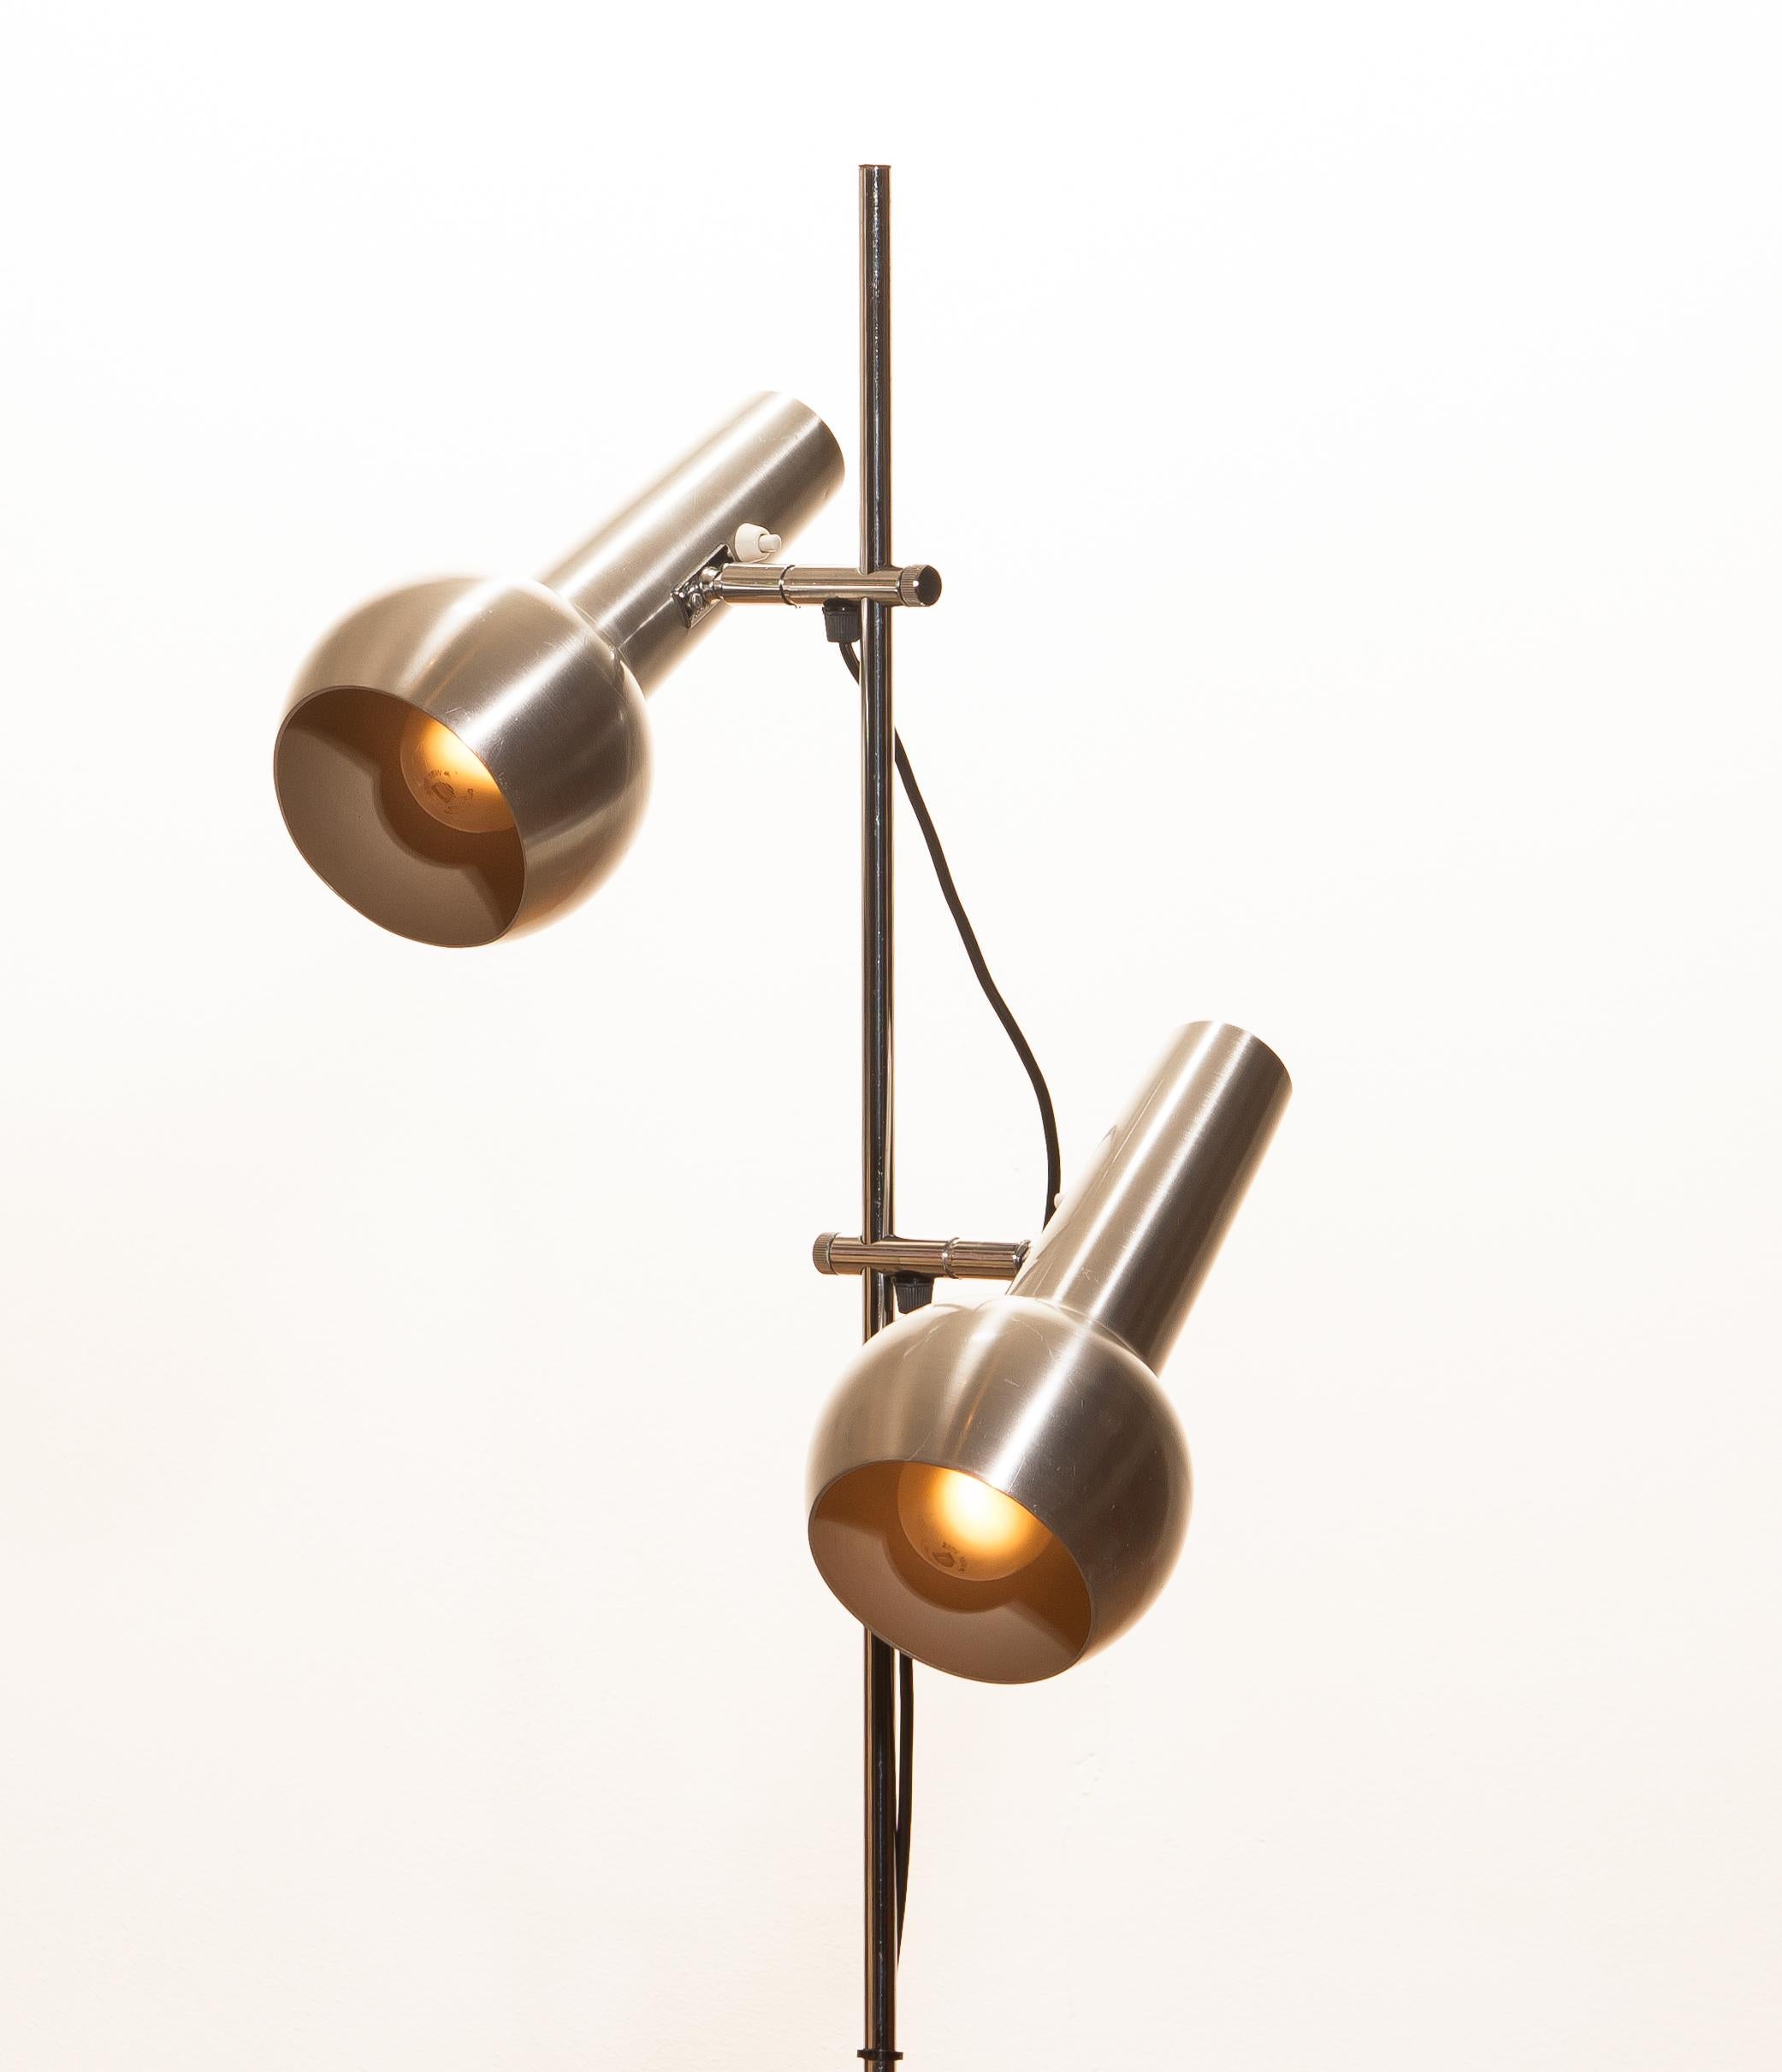 Central American 1970s, Chrome and Aluminium Double Shade Floor Lamp by Koch & Lowy